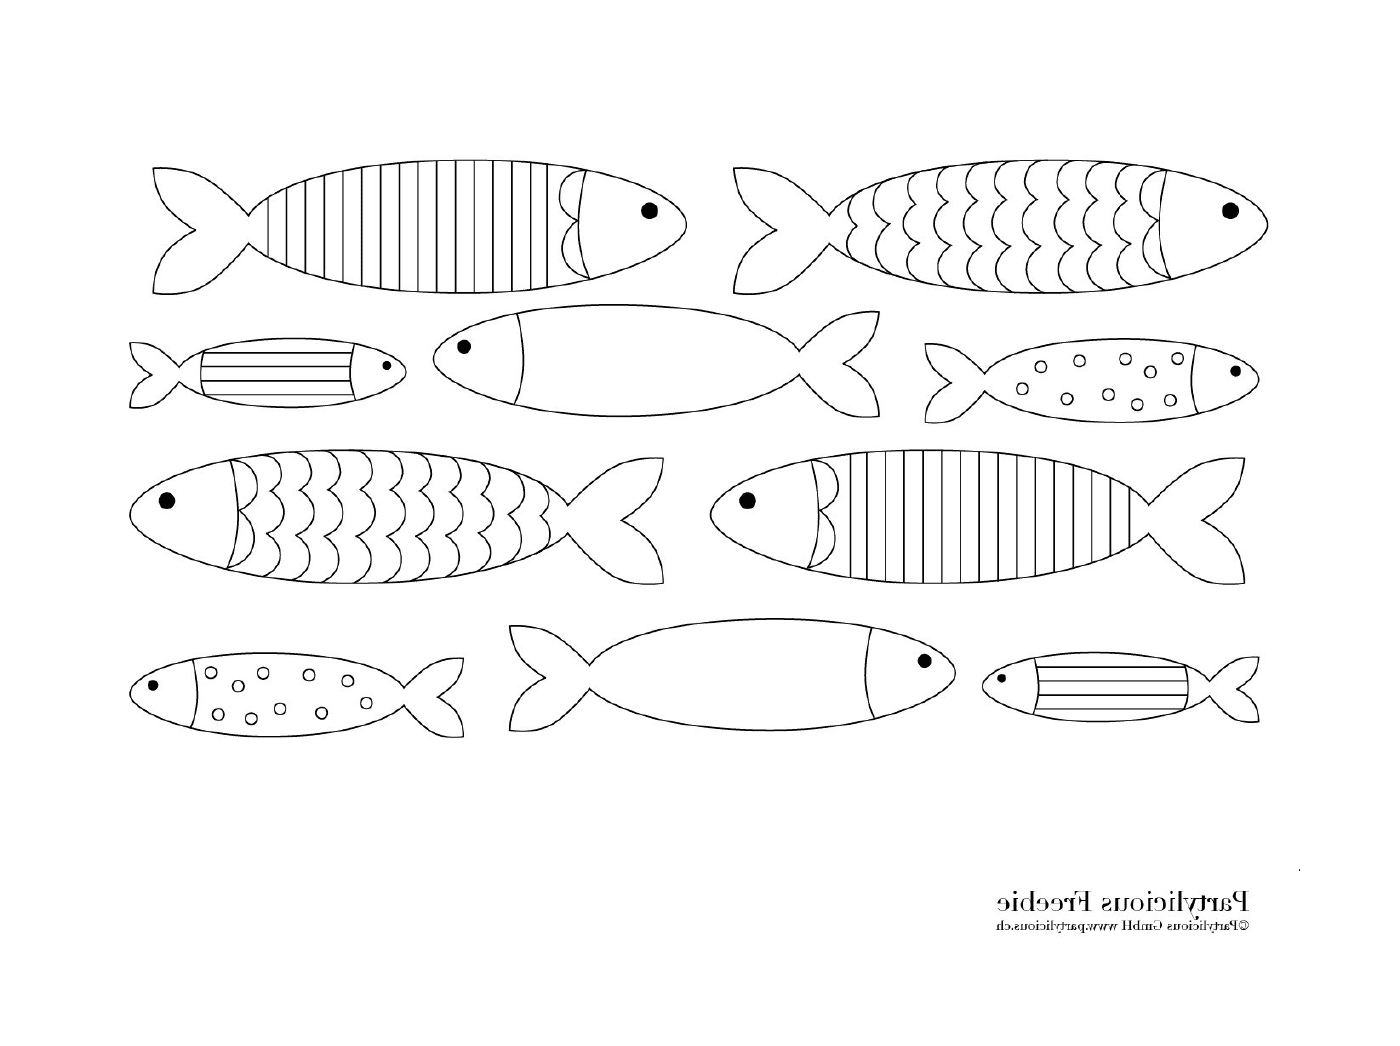  Many different fish on the page 